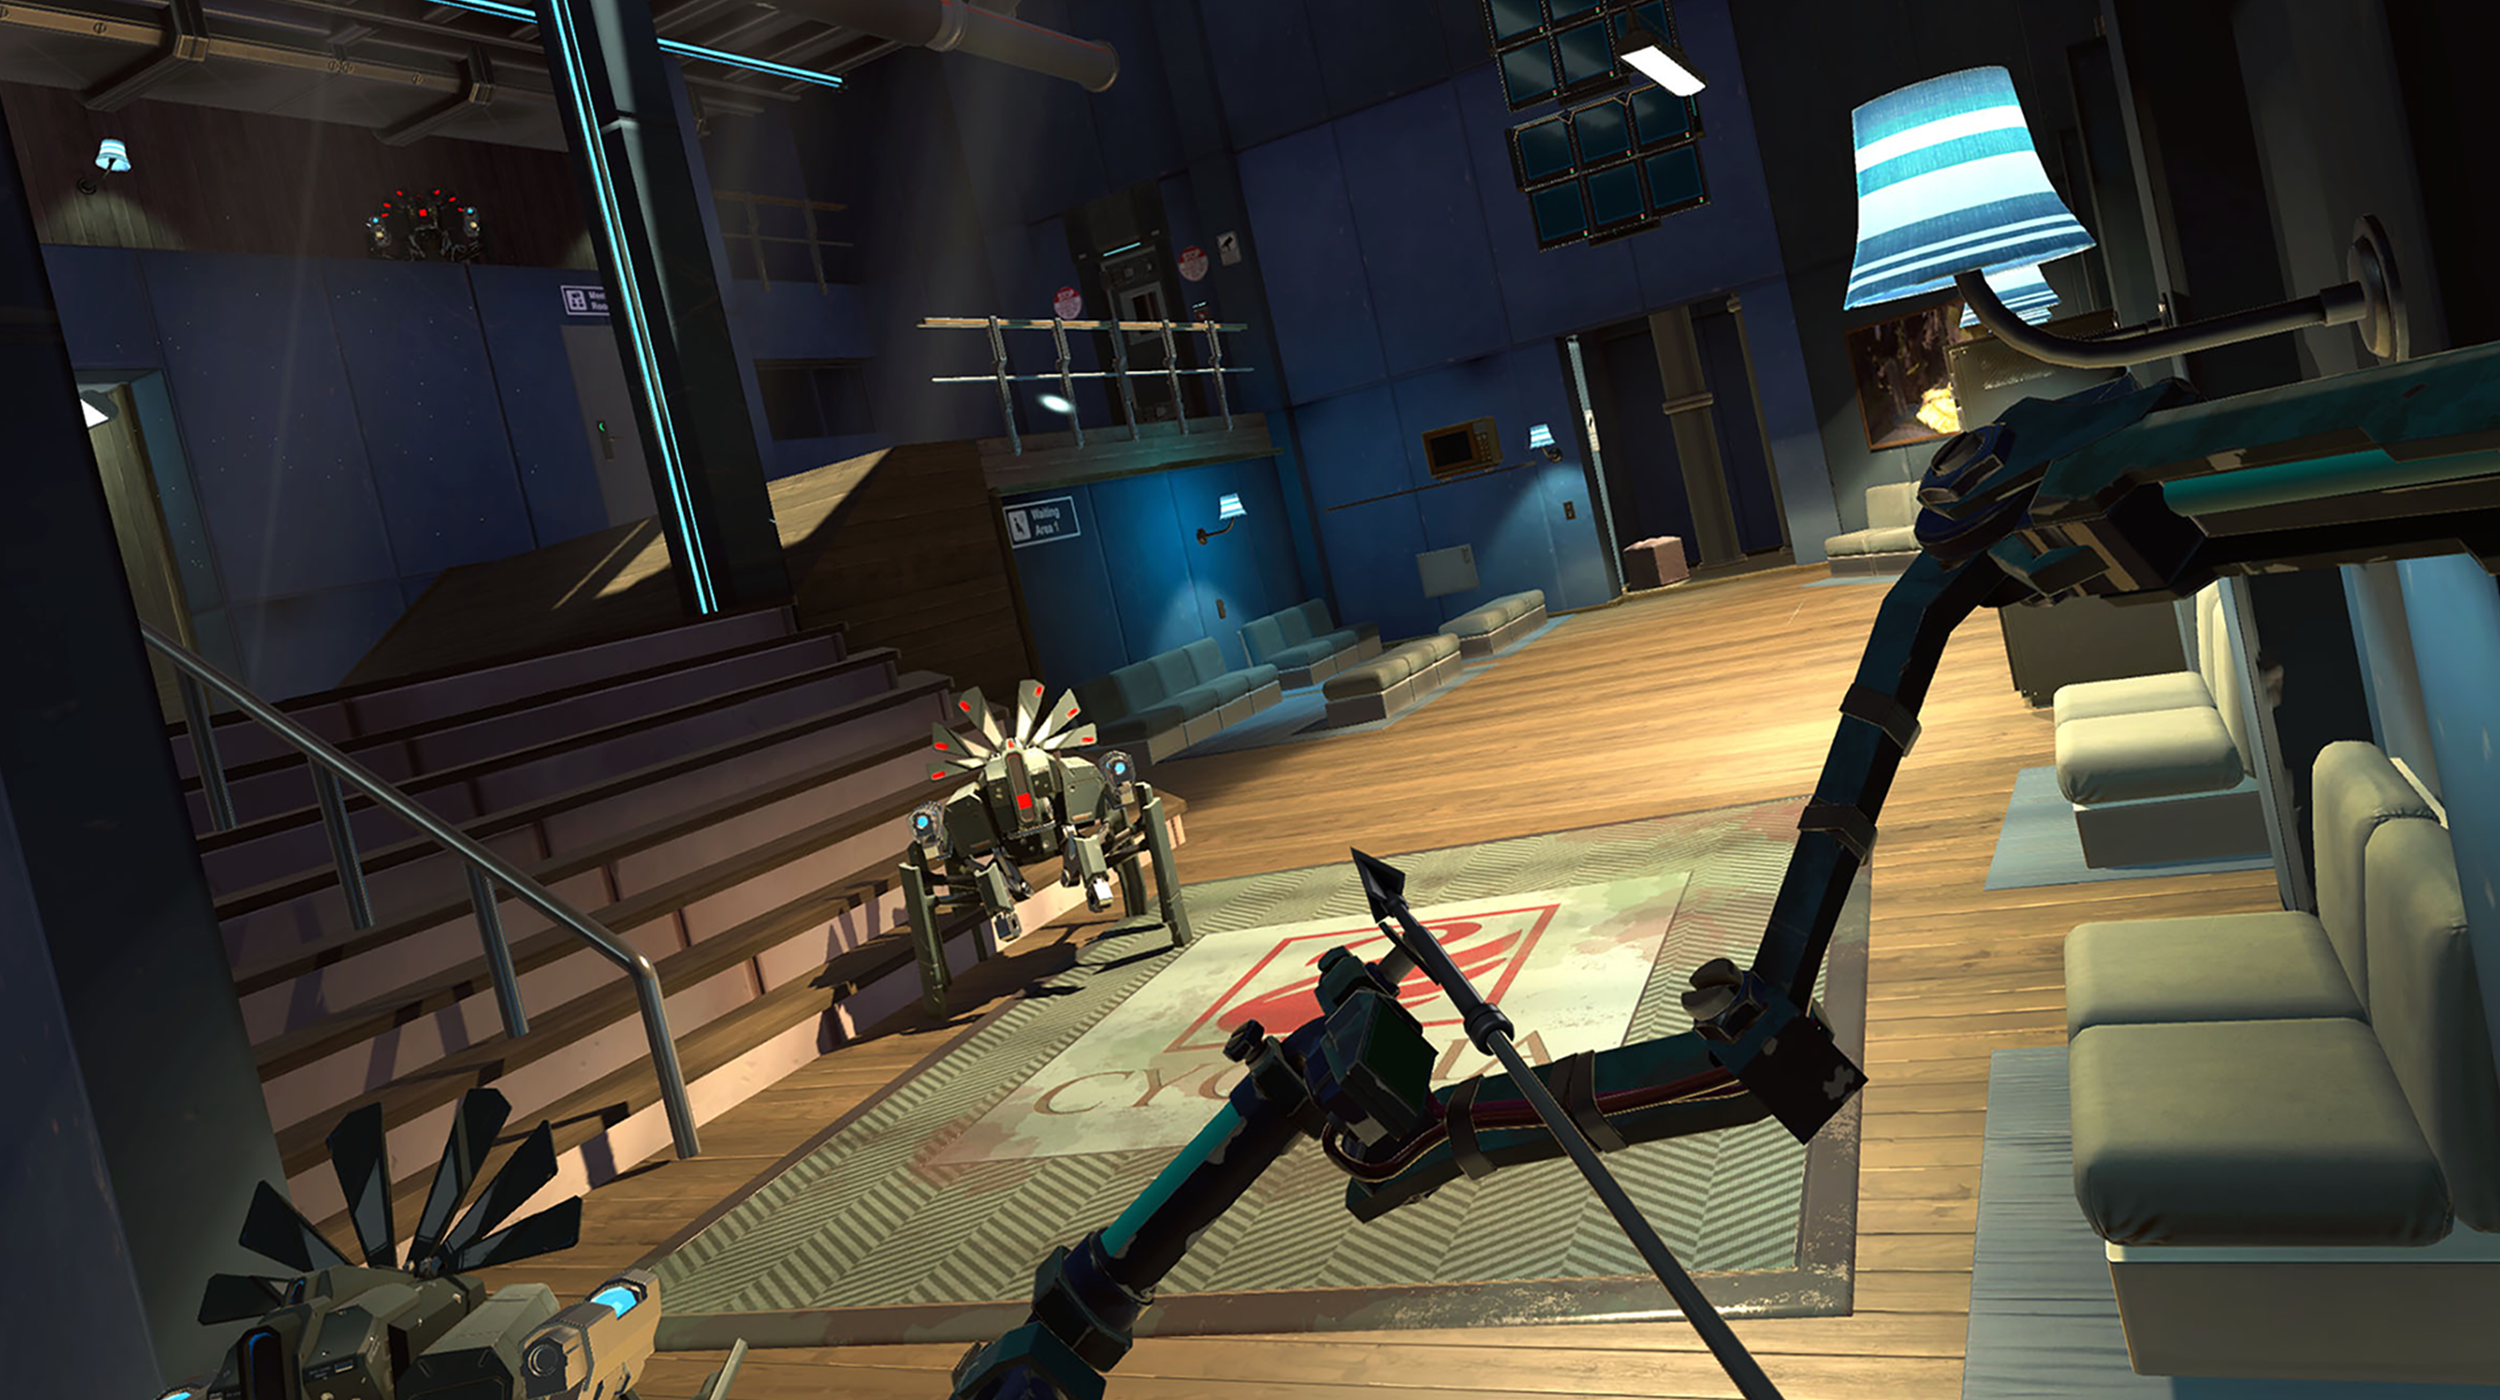 The amazing new release 'Apex Construct'. Shooting a bow and arrow in the virtual world!